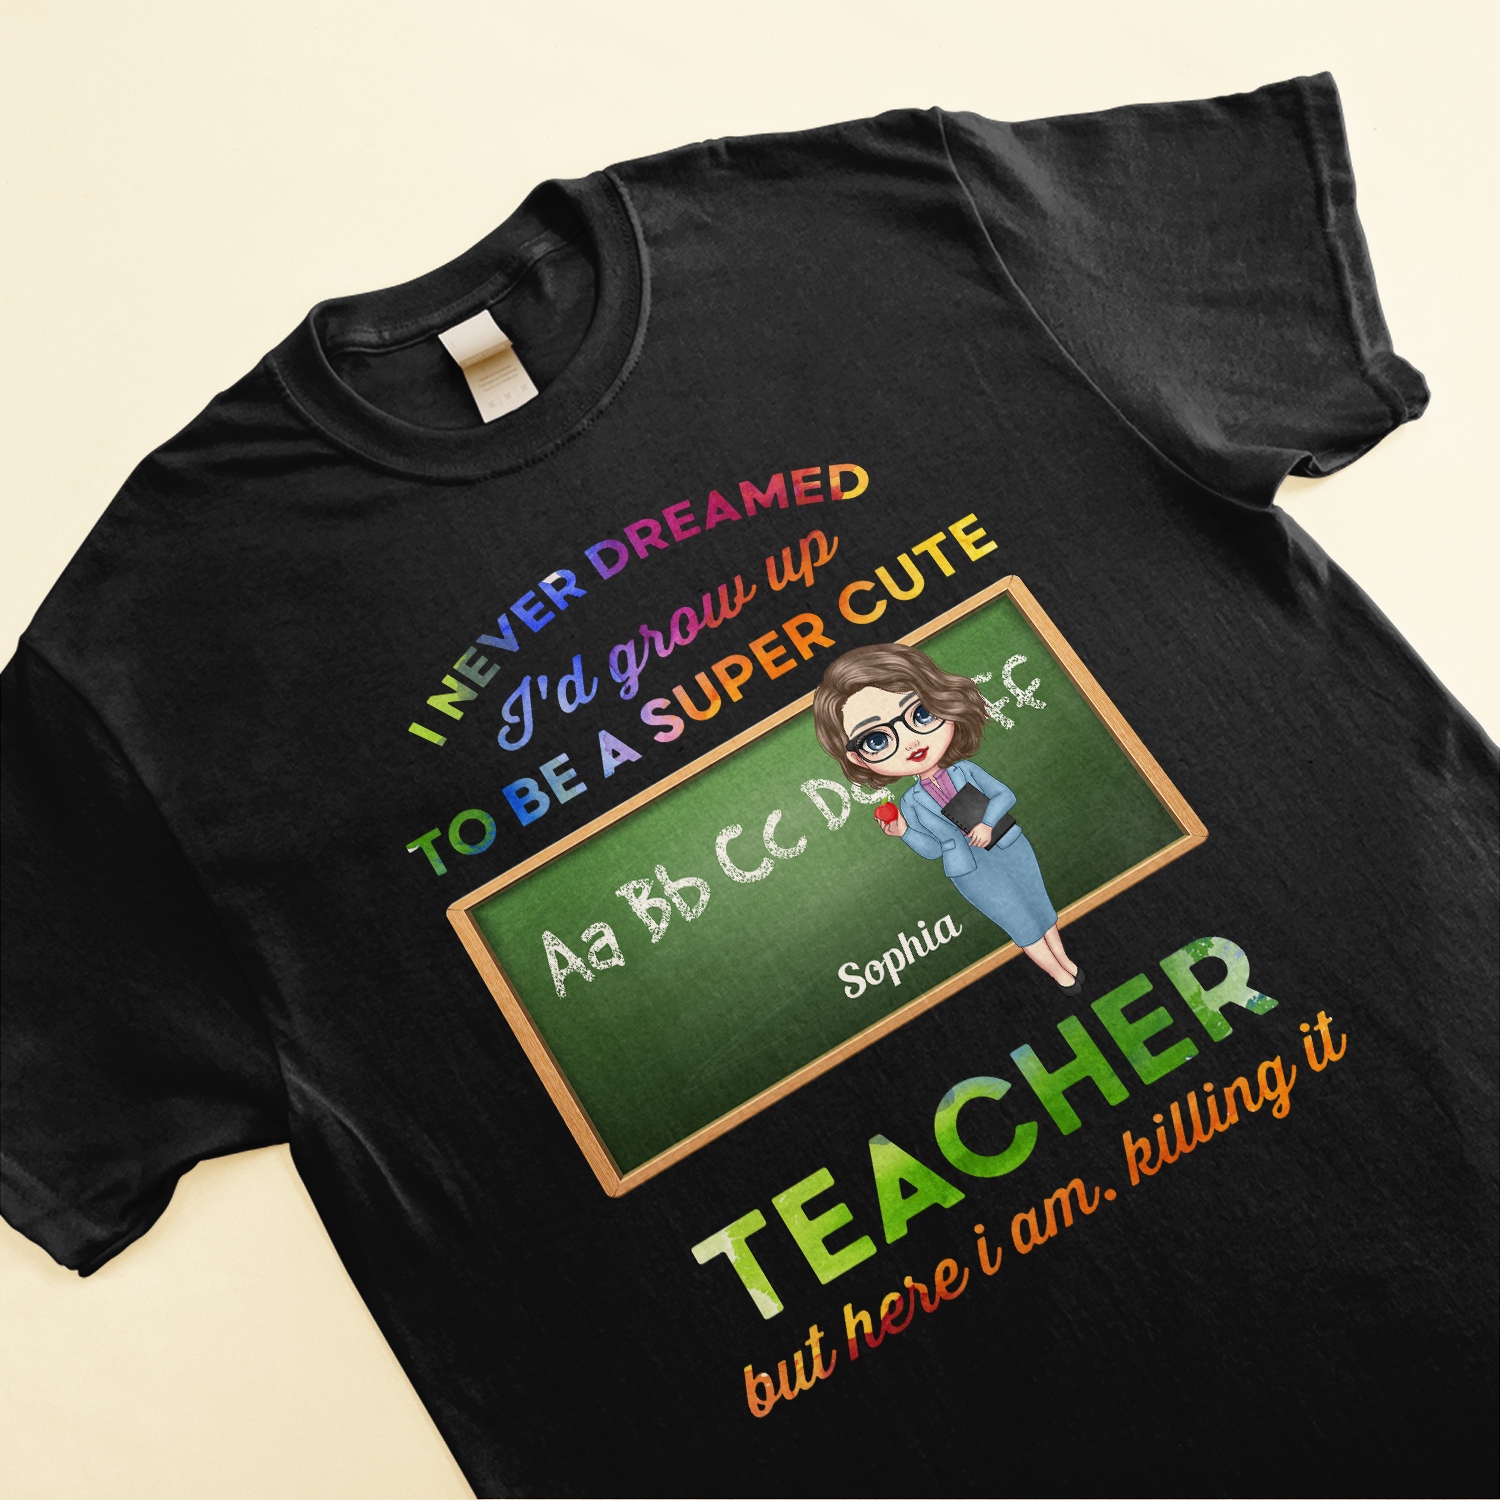 I'd Grow Up To Be A Super Cute Teacher - Personalized Shirt - Birthday, Back To School Gift For Teacher